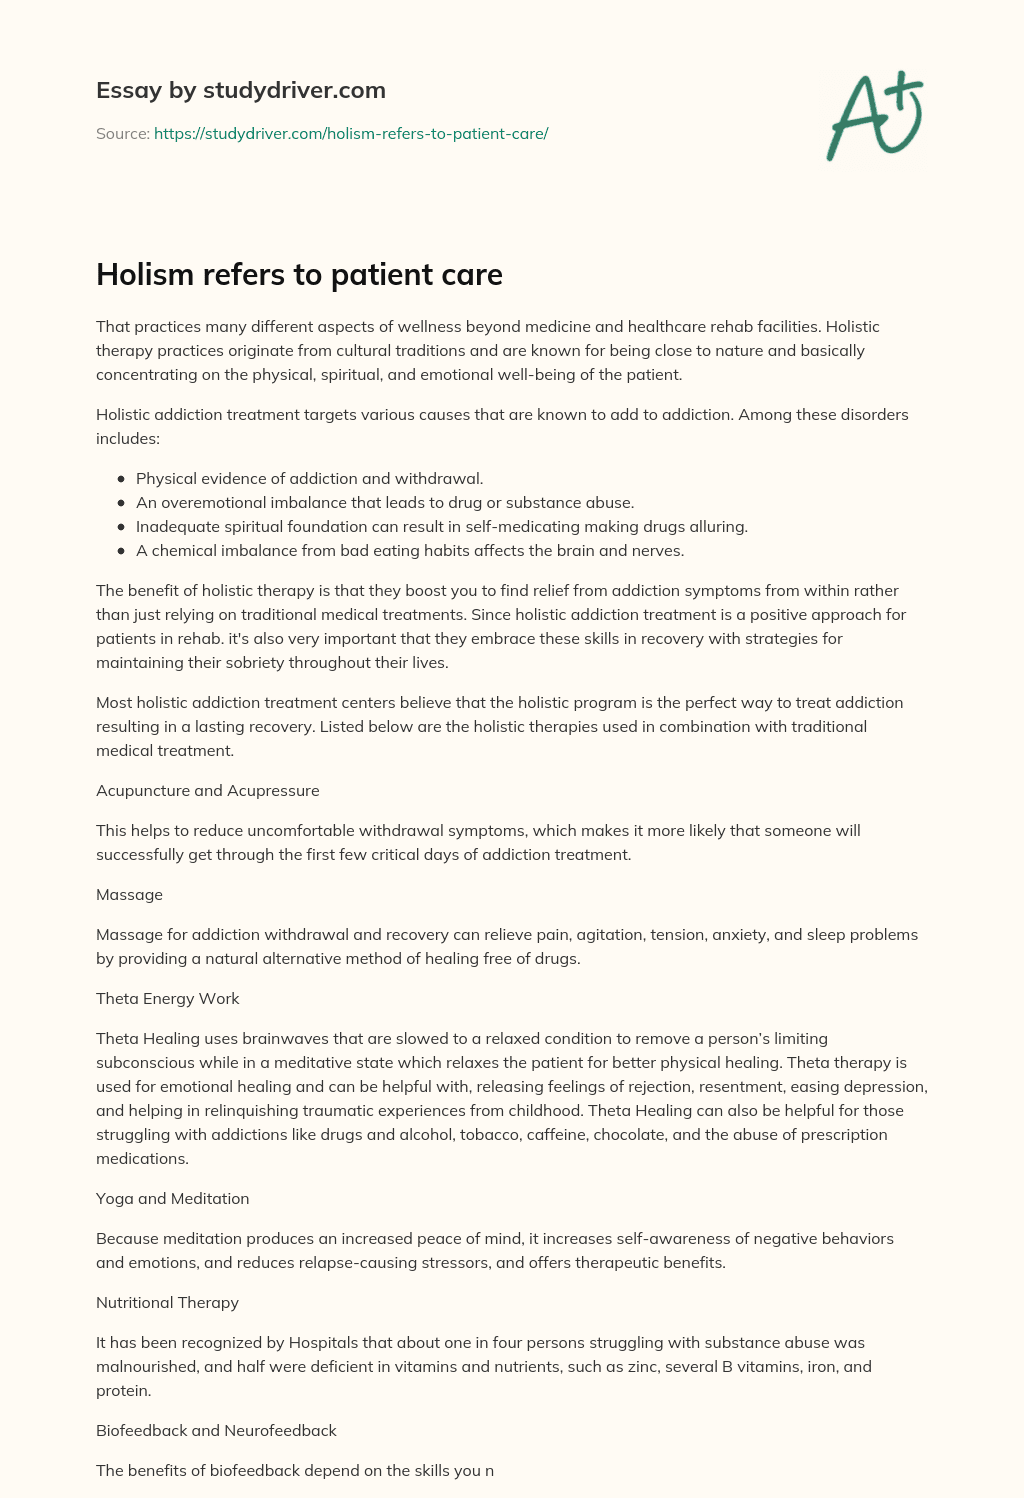 Holism Refers to Patient Care essay